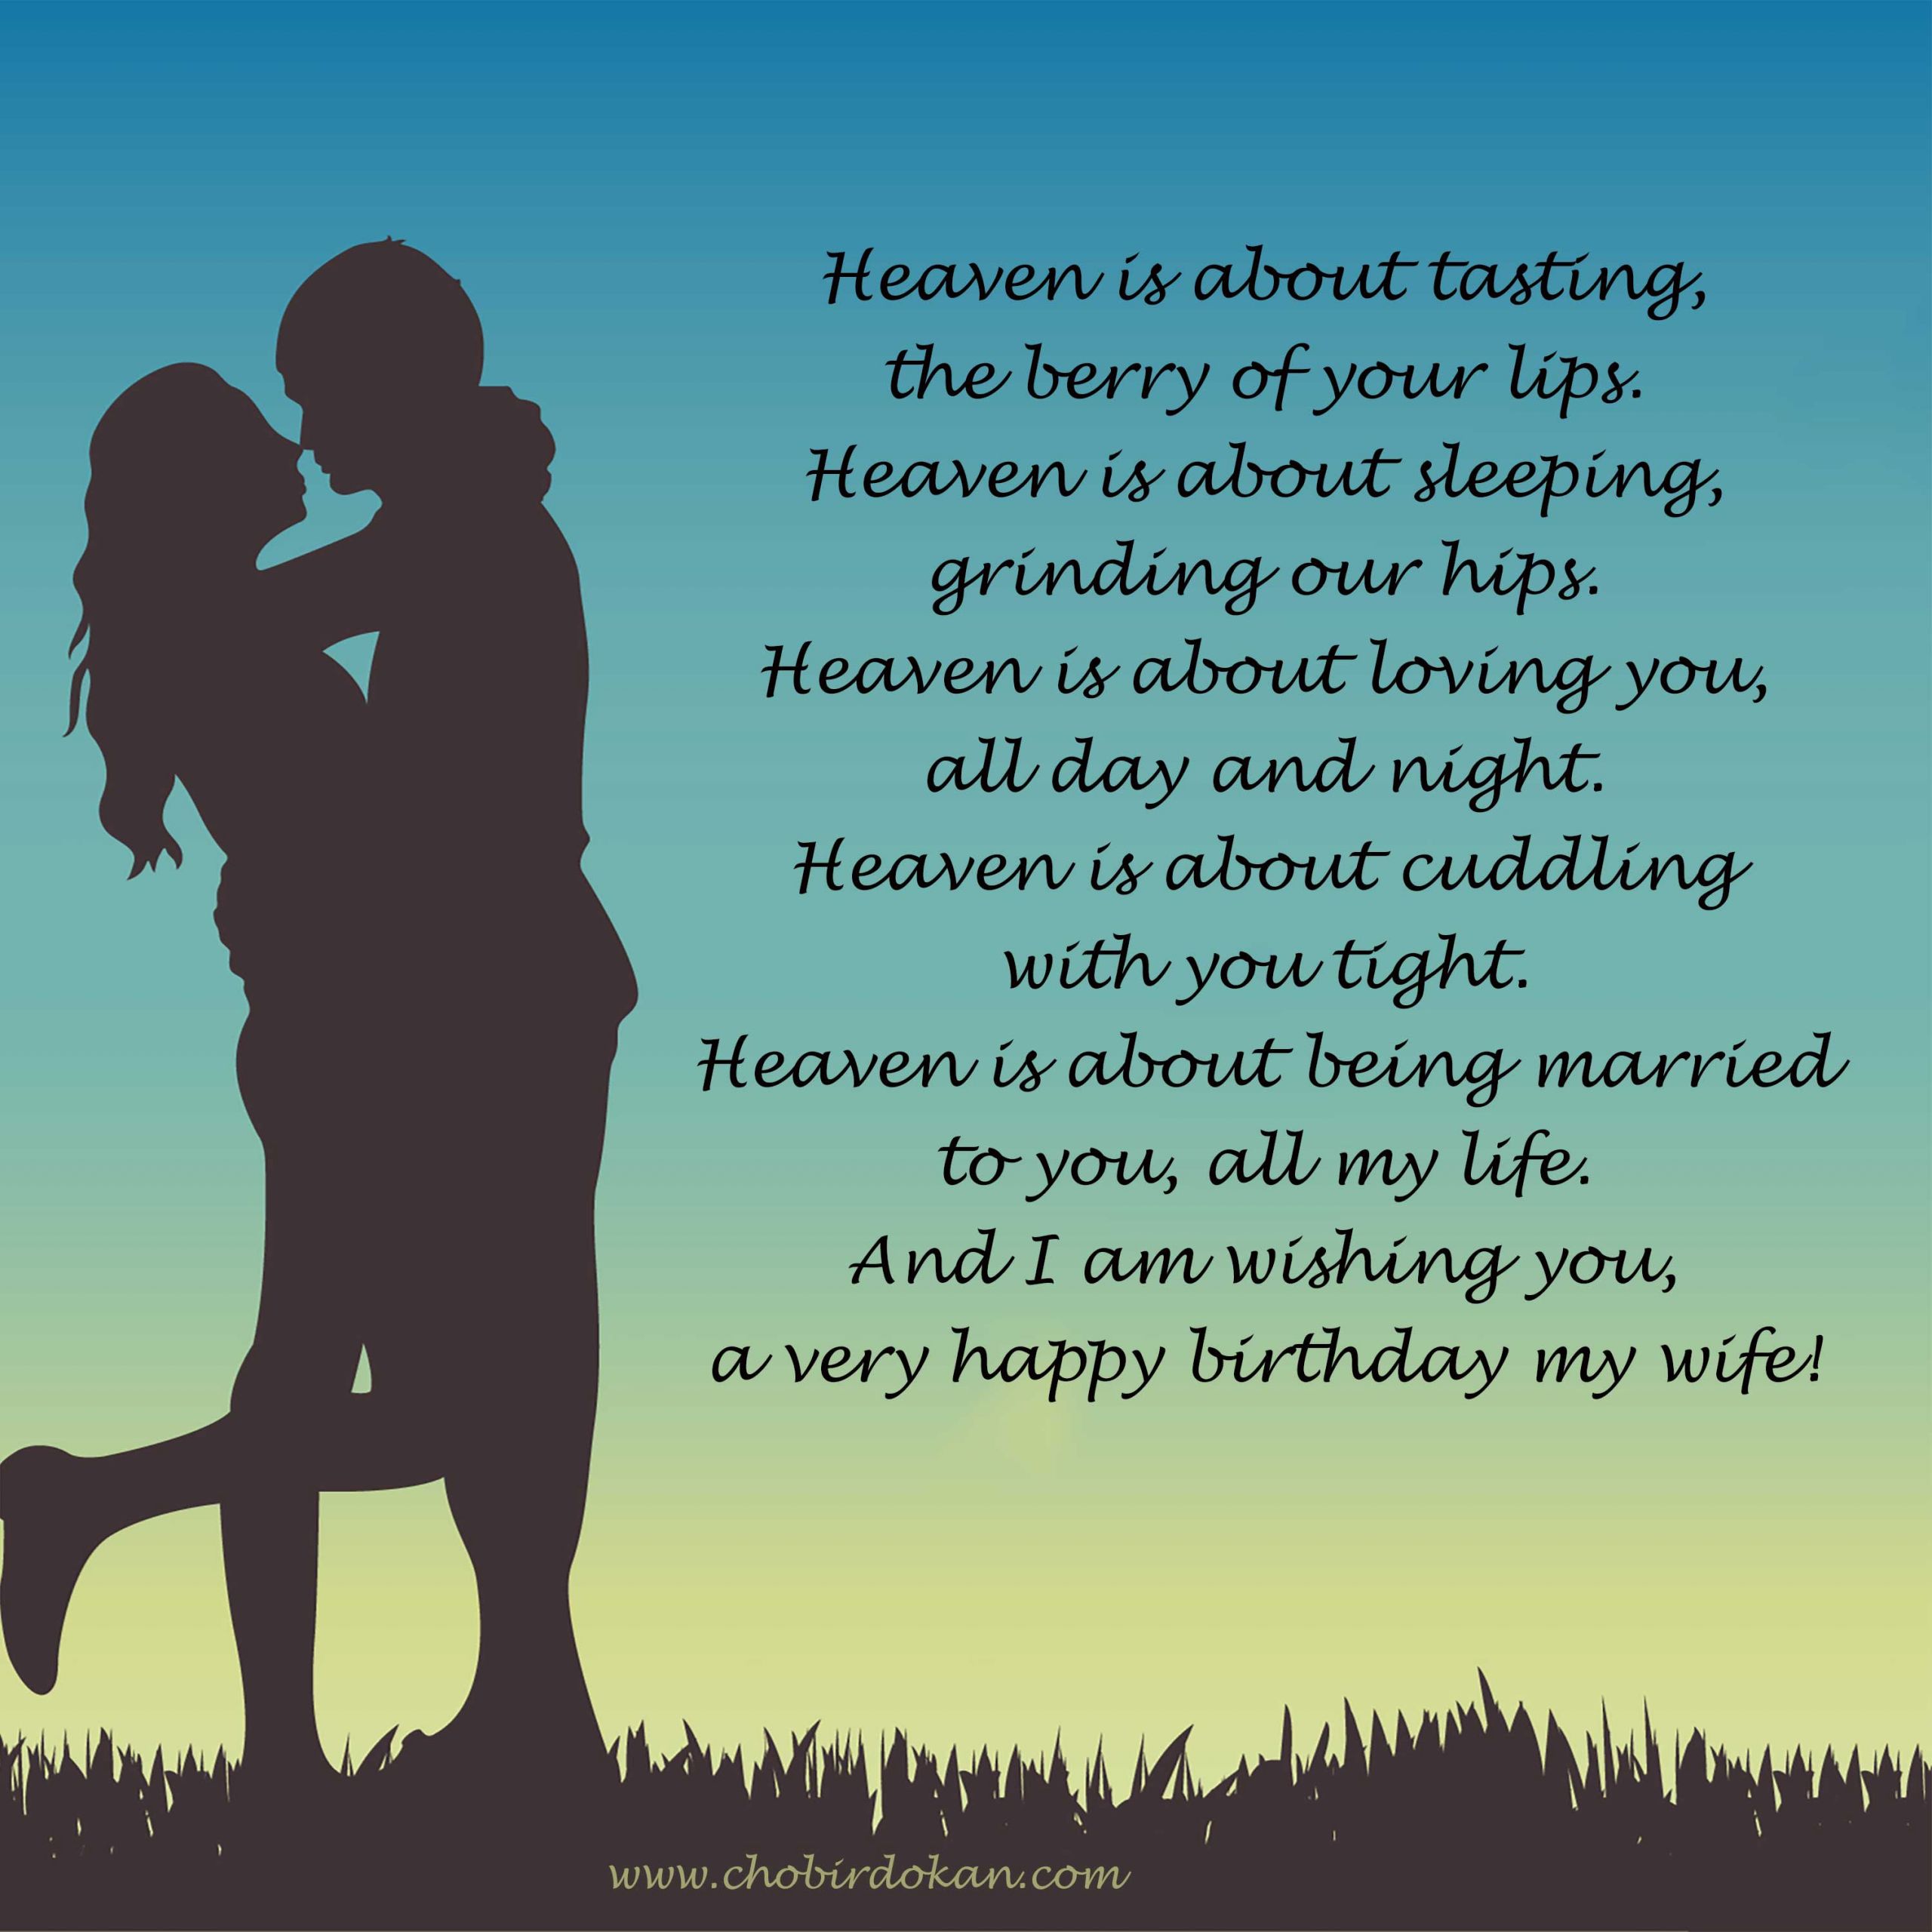 Birthday Wishes Poems
 Romantic Happy Birthday Poems For Her For Girlfriend or